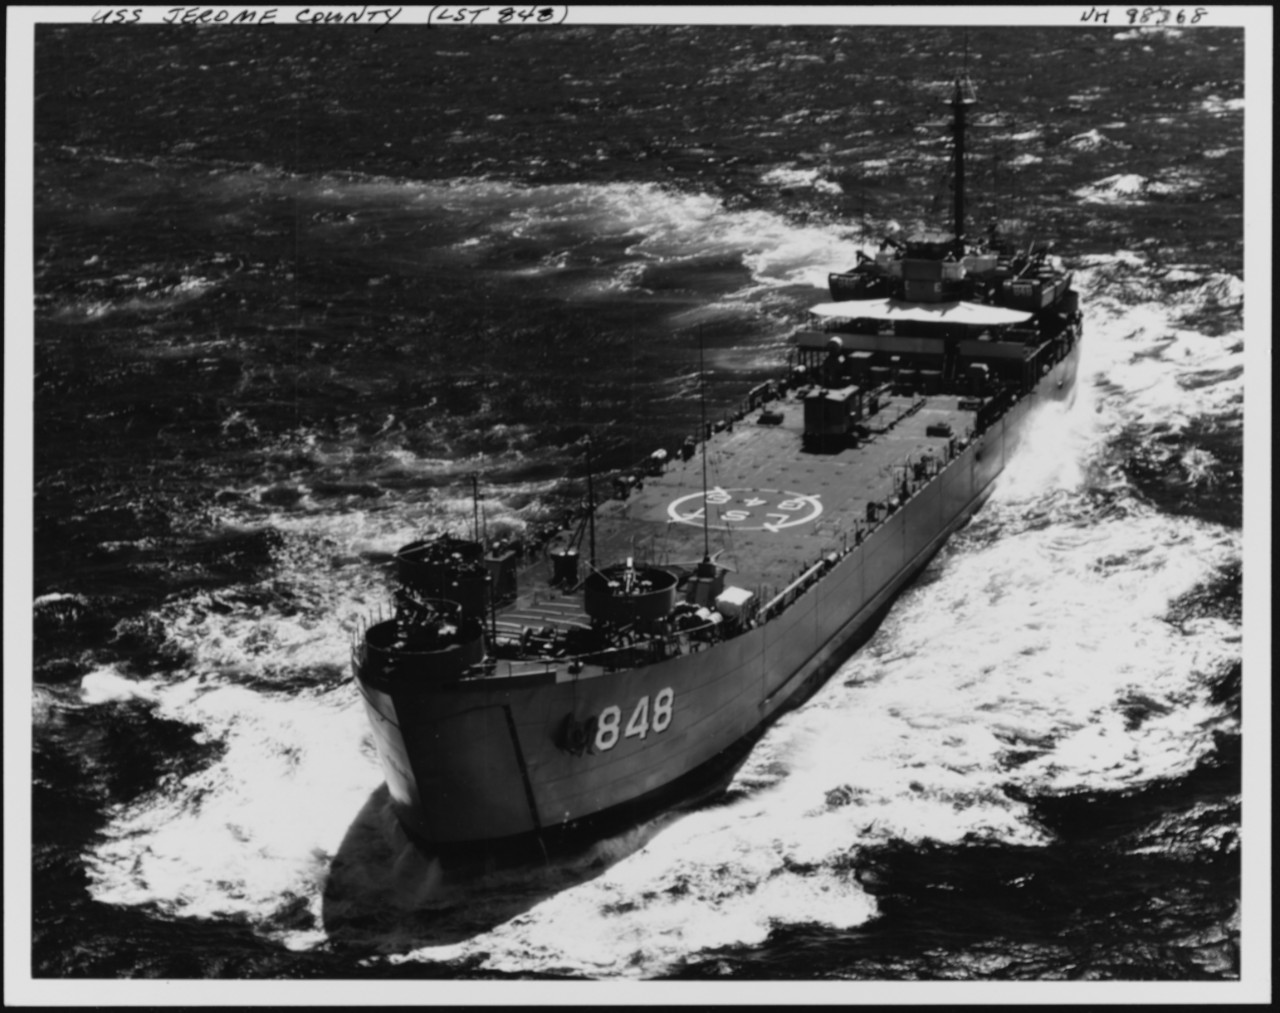 Photo #: NH 98368  USS Jerome County (LST-848)